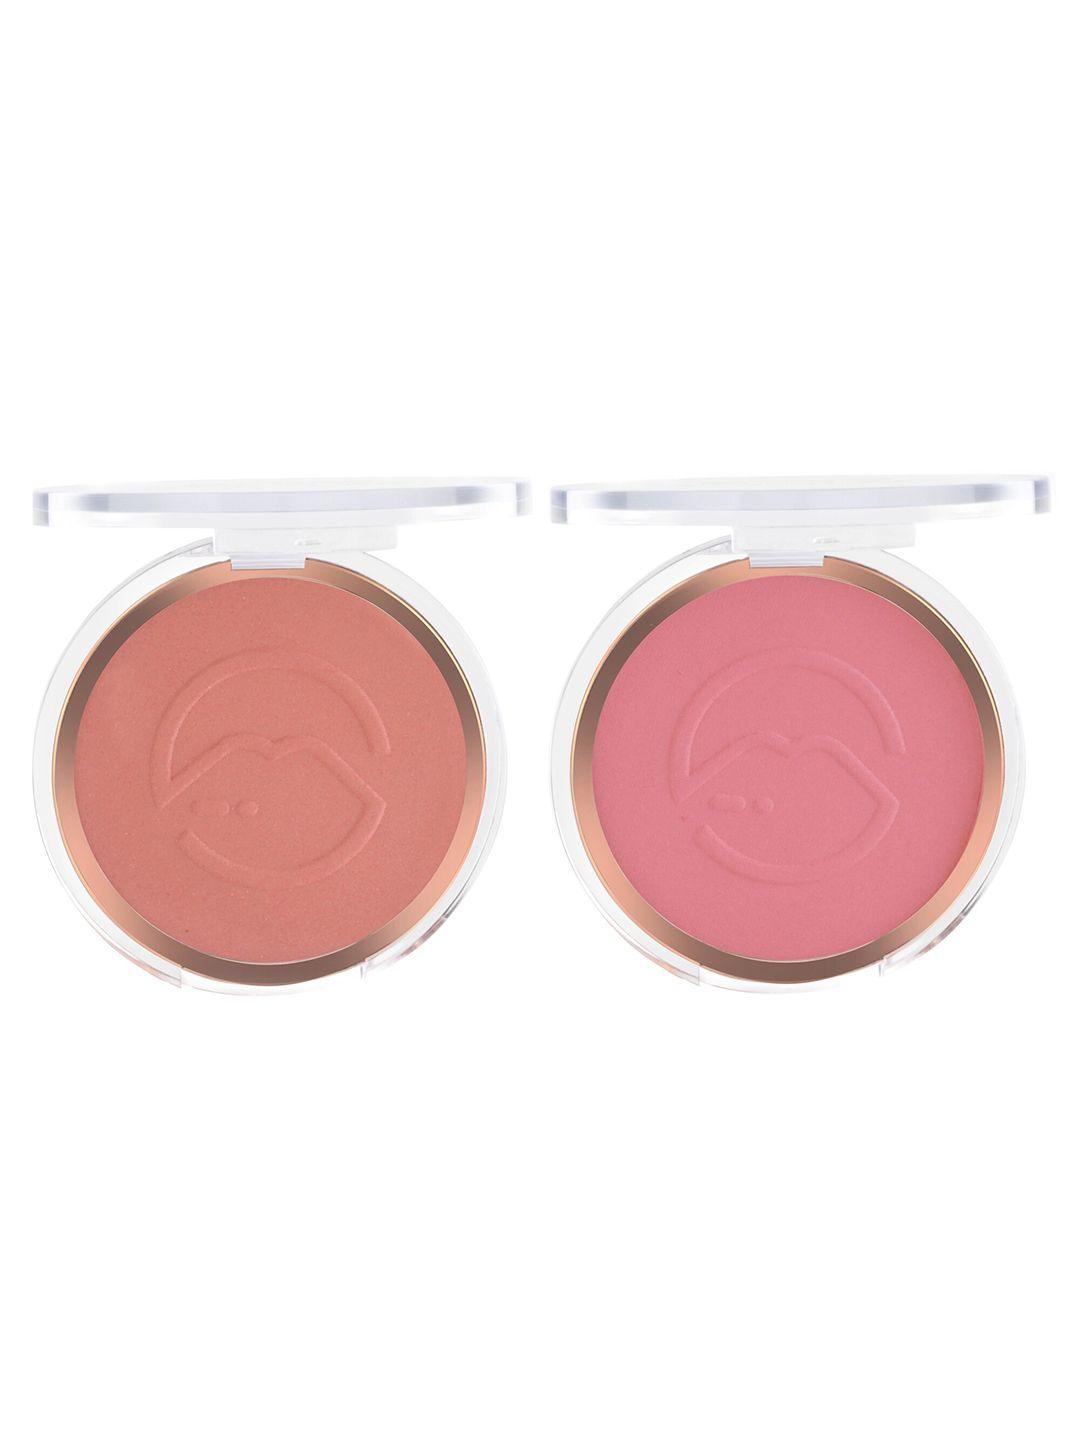 mars set of 2 flush of love highly pigmented matte face blusher - shade 01 & 04